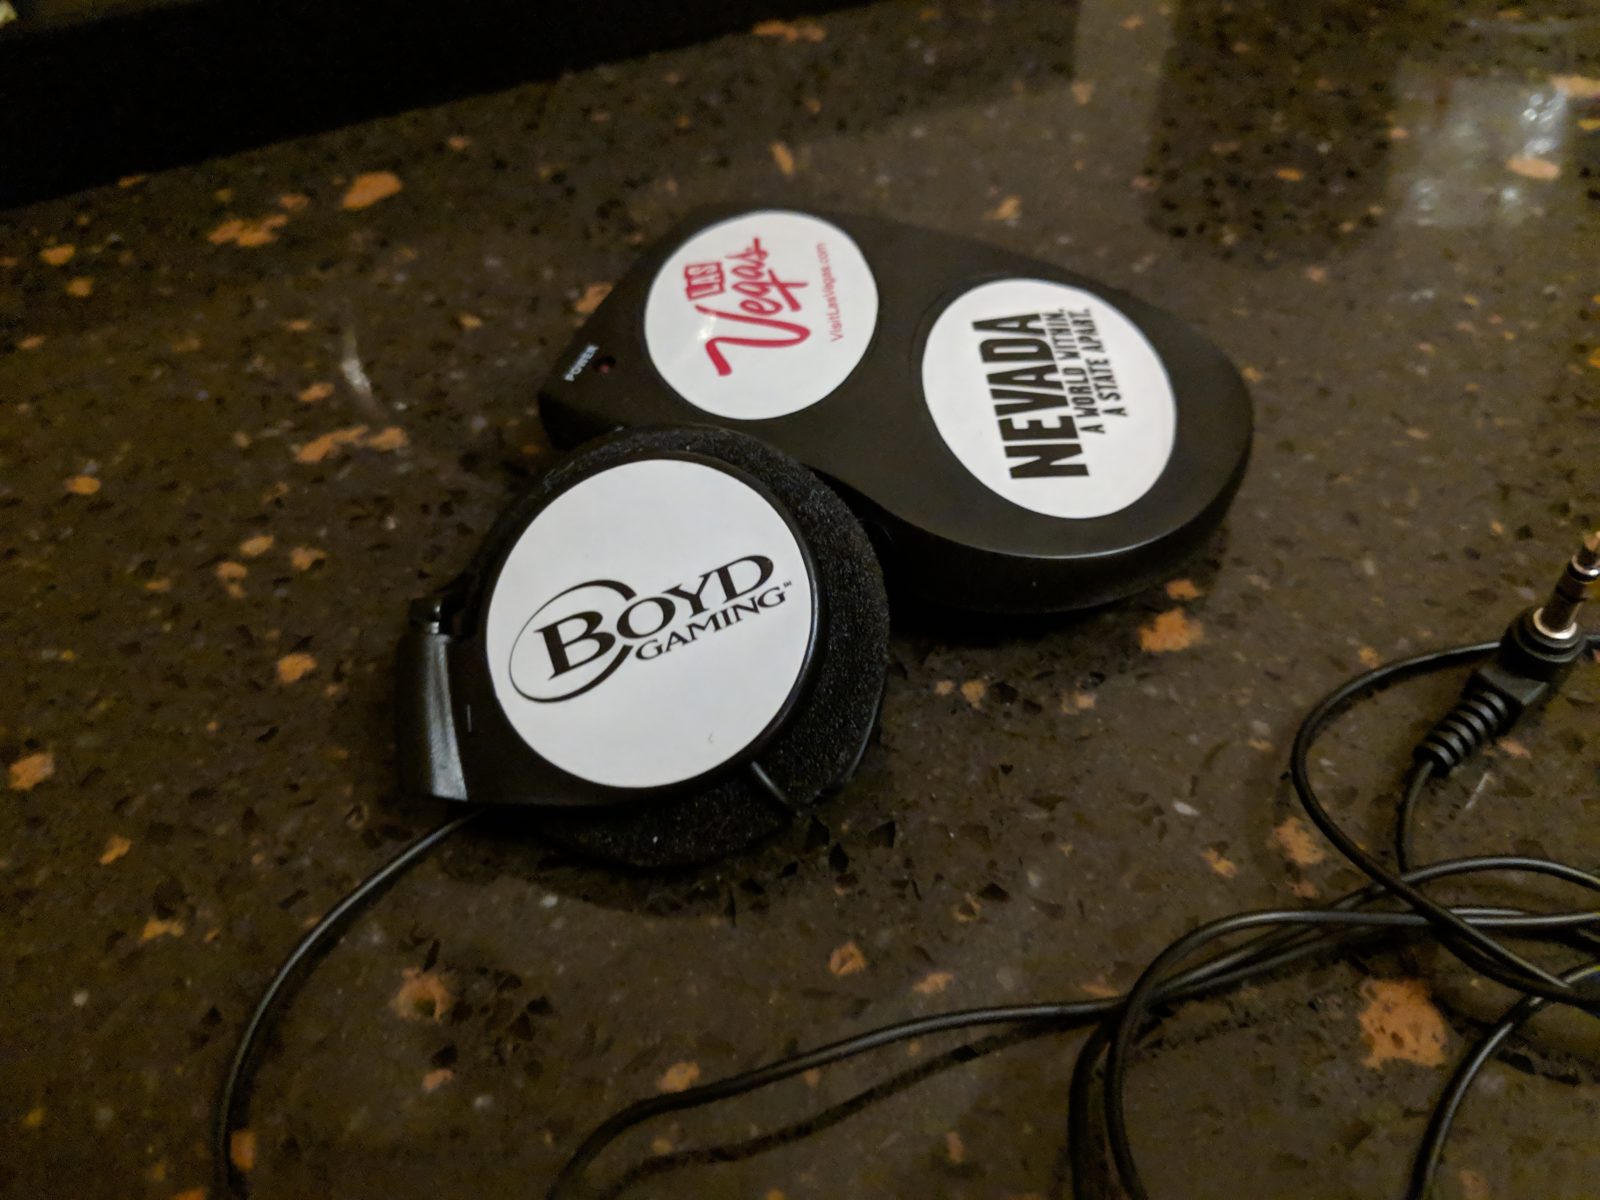 Fans who bought tickets to the entire event received ear buds that allowed them to listen to the network broadcast in the arena.